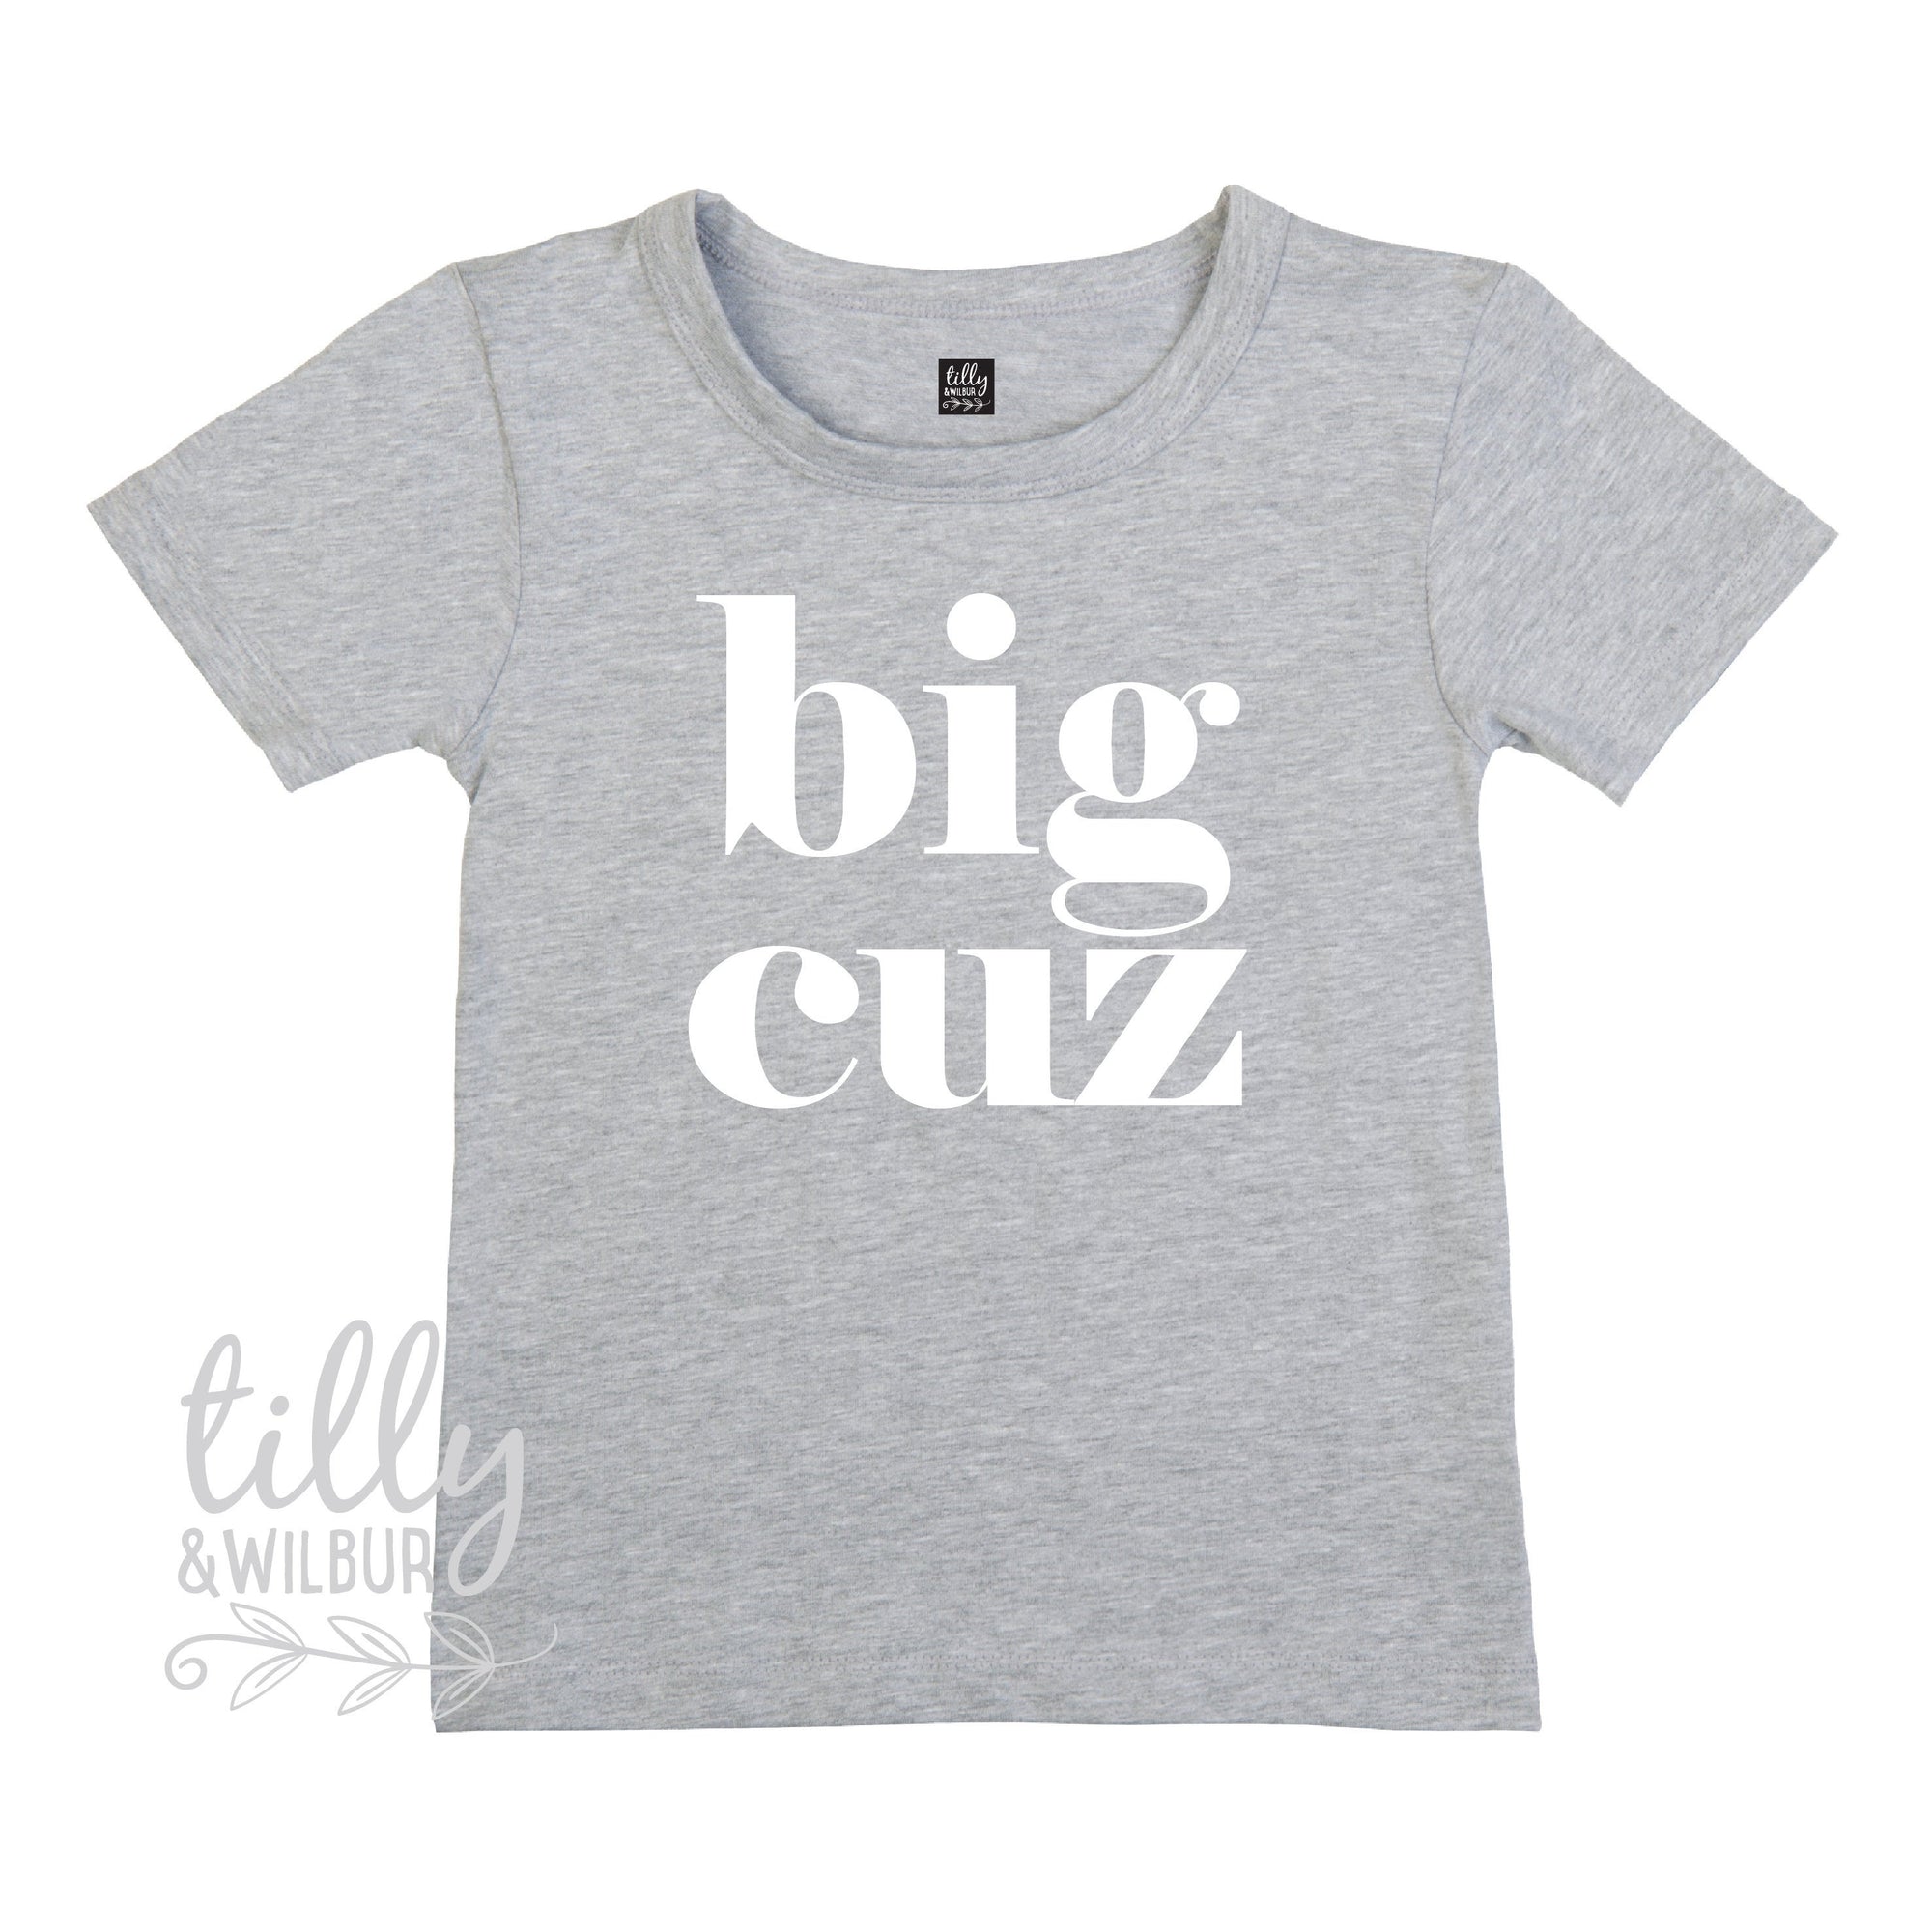 Big Cuz T-Shirt, Big Cuz Baby Bodysuit, Big Cousin, Cousin Gift, Pregnancy Announcement, You&#39;re Going To Be A Big Cousin, Promoted to Cousin